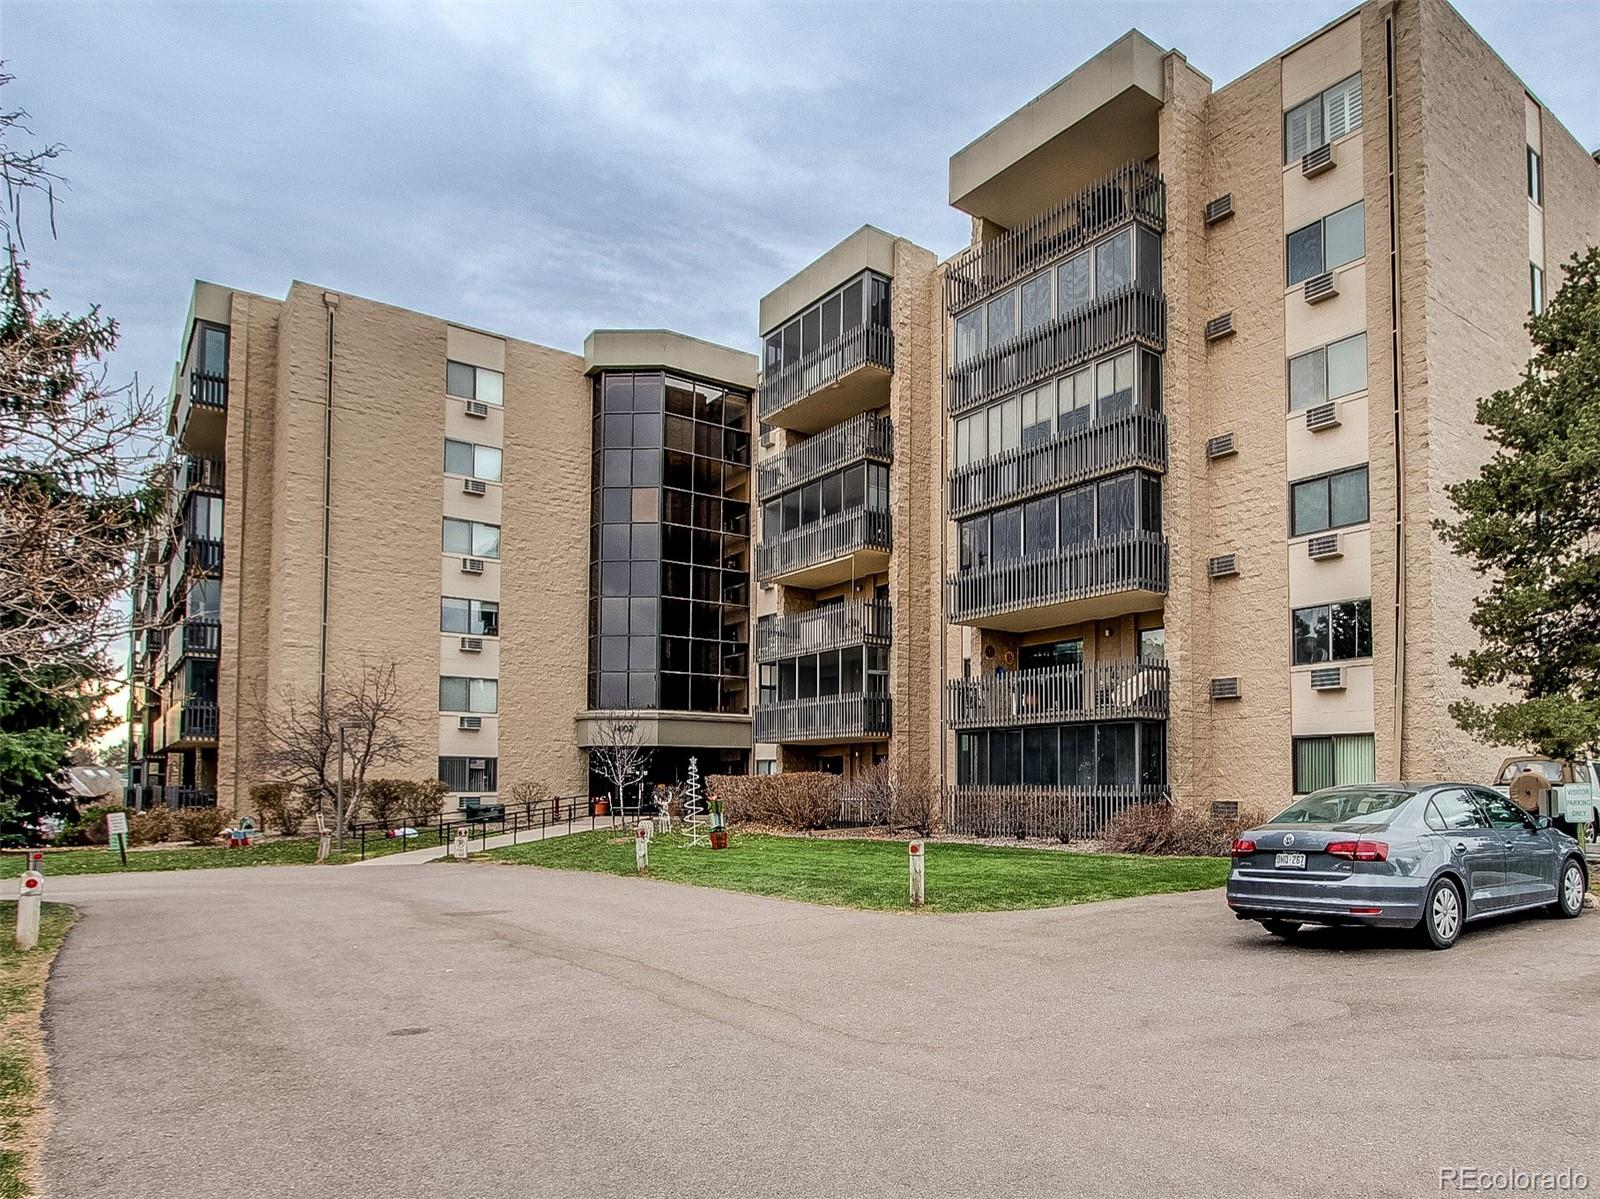 Classic exterior!  Convenient elevator access.  Unit is on the back side of this entrance.